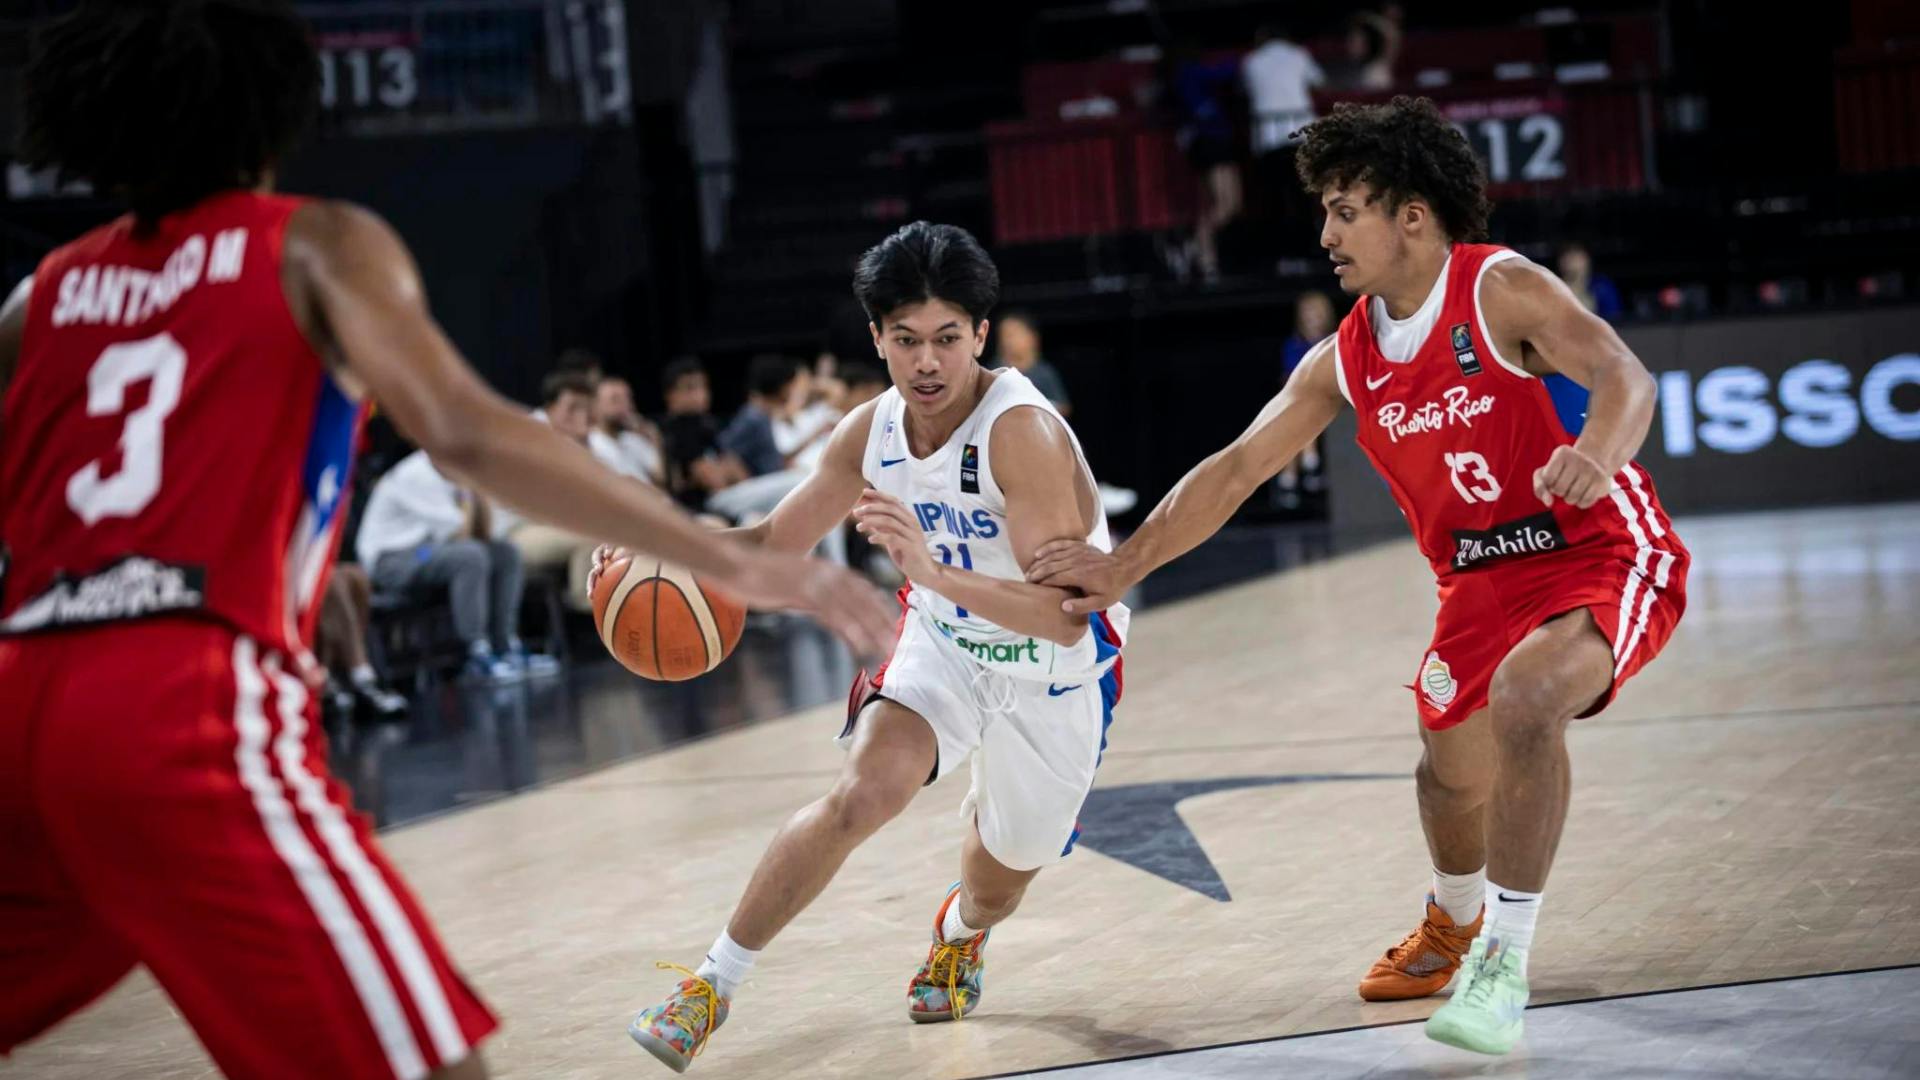 Gilas Boys take first quarter lead but later fumble vs. Puerto Rico, to face Team USA next in FIBA U17 World Cup